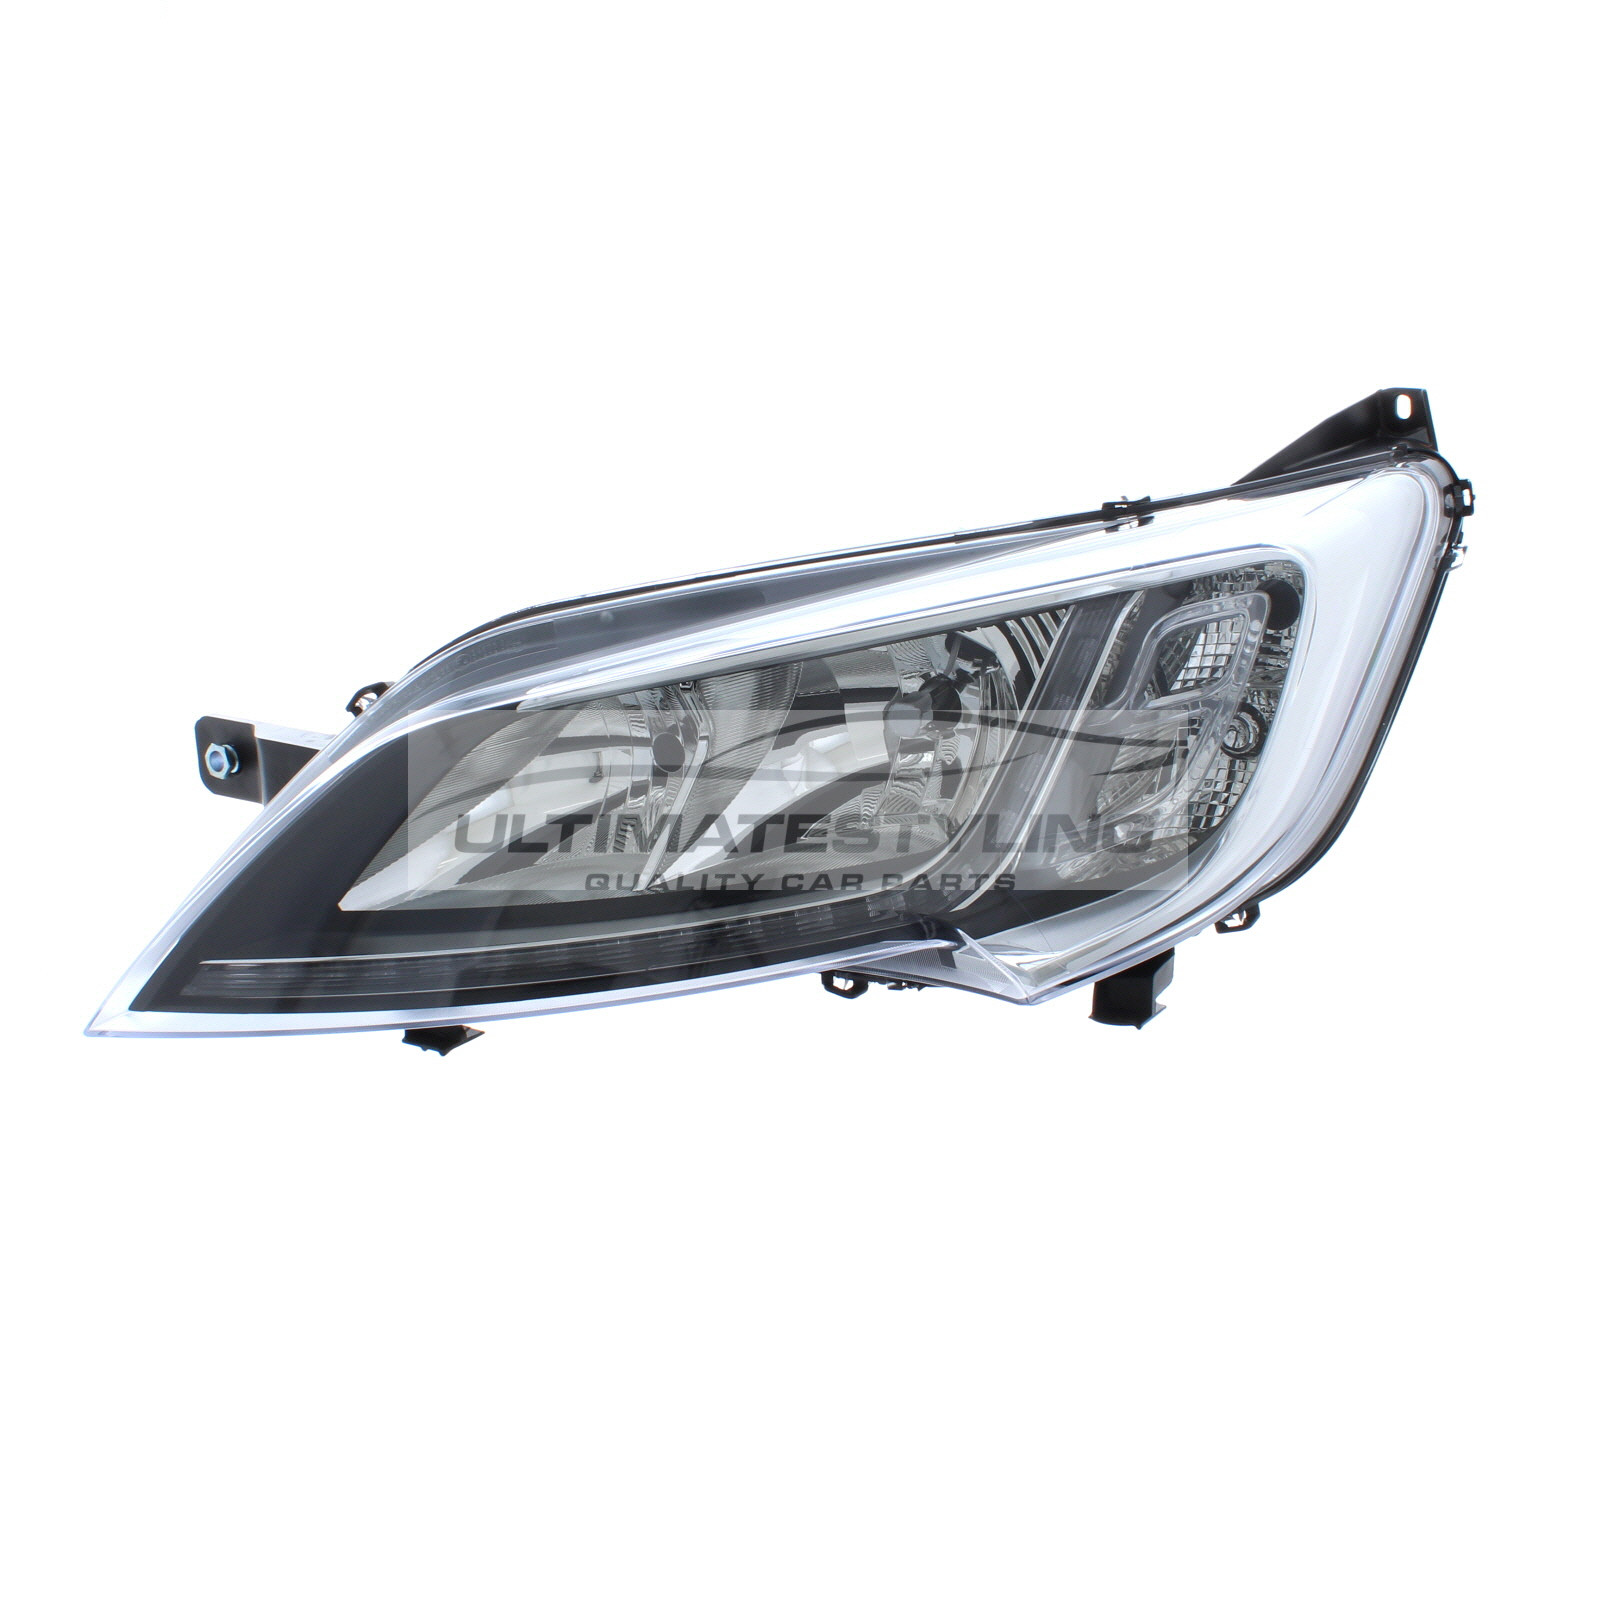 Citroen Relay 2014->, Fiat Ducato 2014-> Halogen With LED Daytime Running Lamp, Electric With Motor, Chrome Headlight / Headlamp Passengers Side (LH)